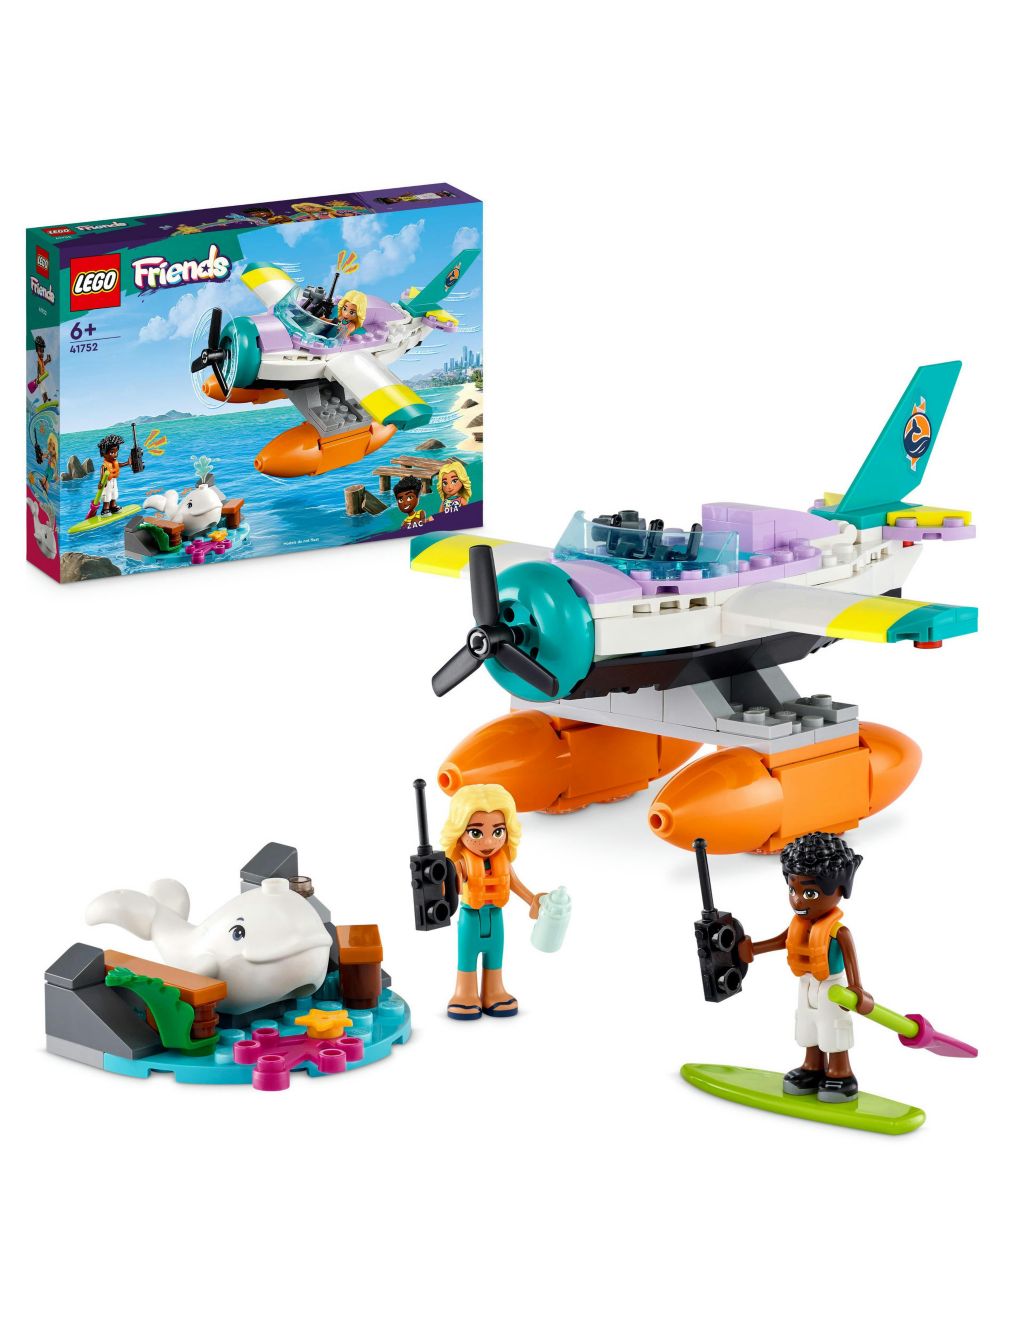 LEGO Friends Sea Rescue Plane Toy Playset 41752 (6+ Yrs) 3 of 6